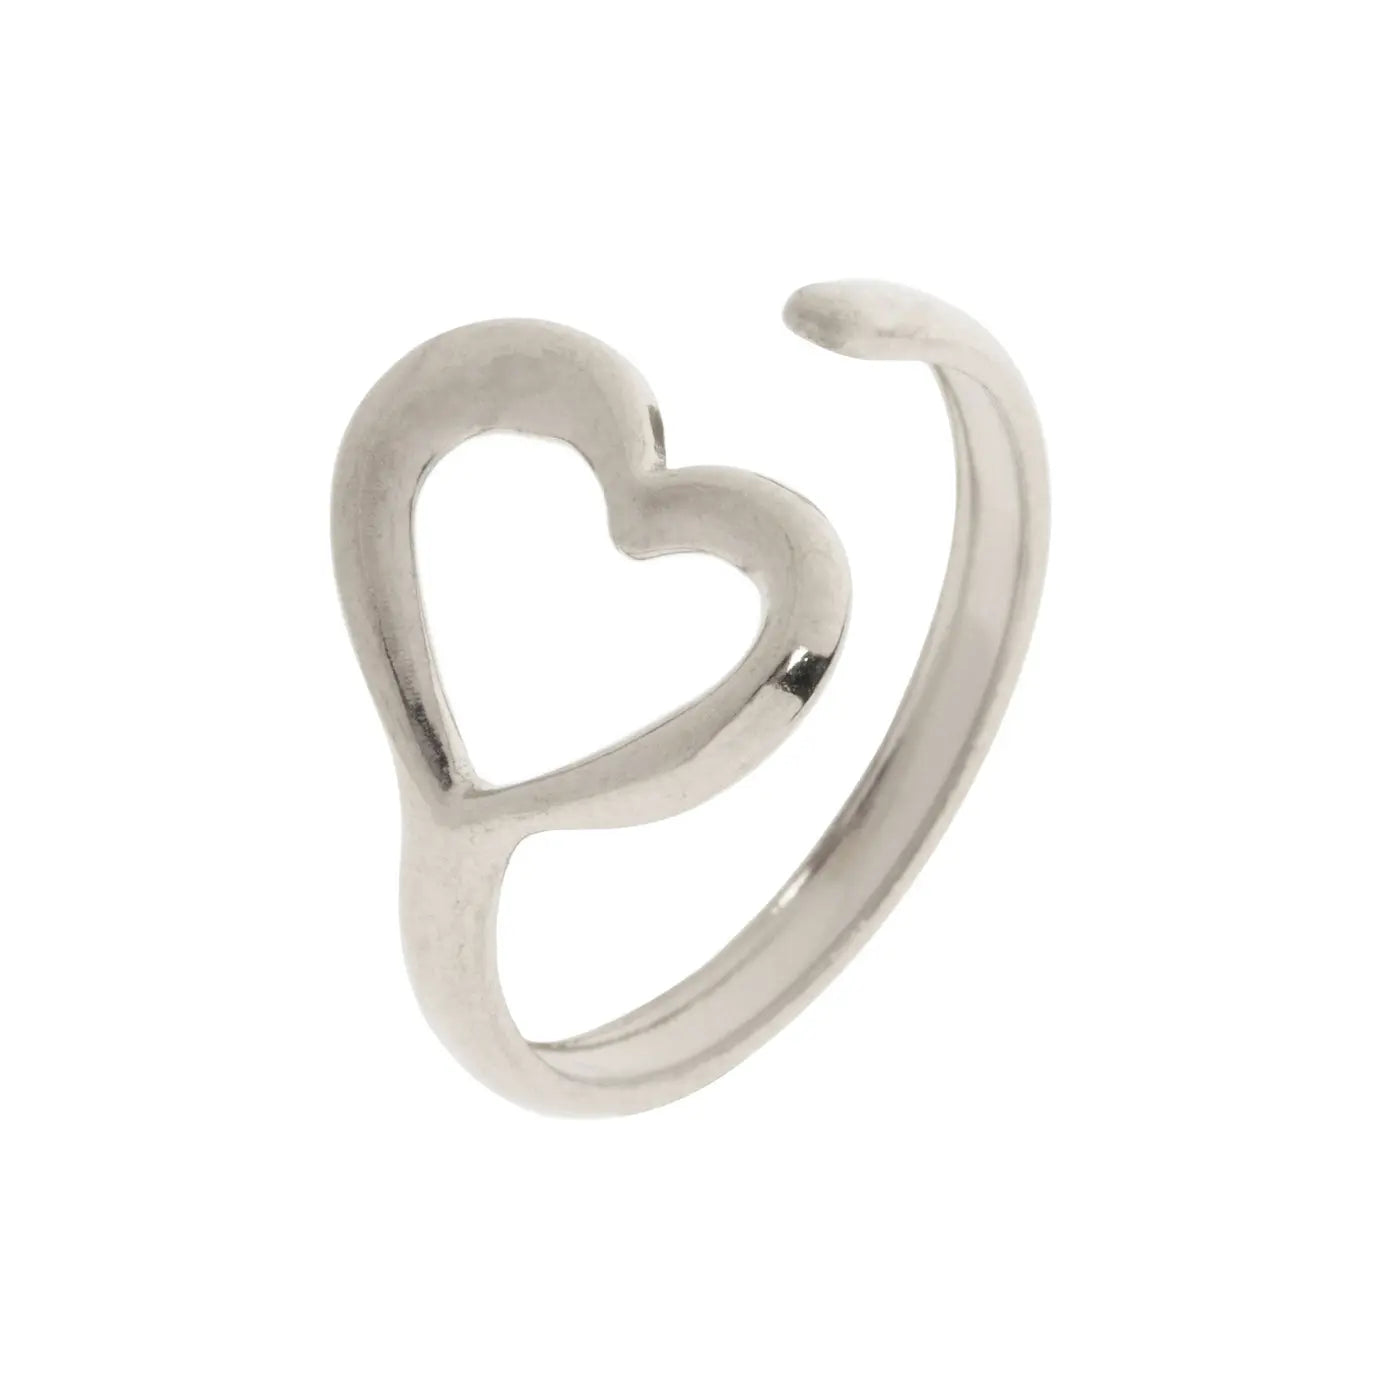 Sarah - Large Heart Ring Stainless Steel